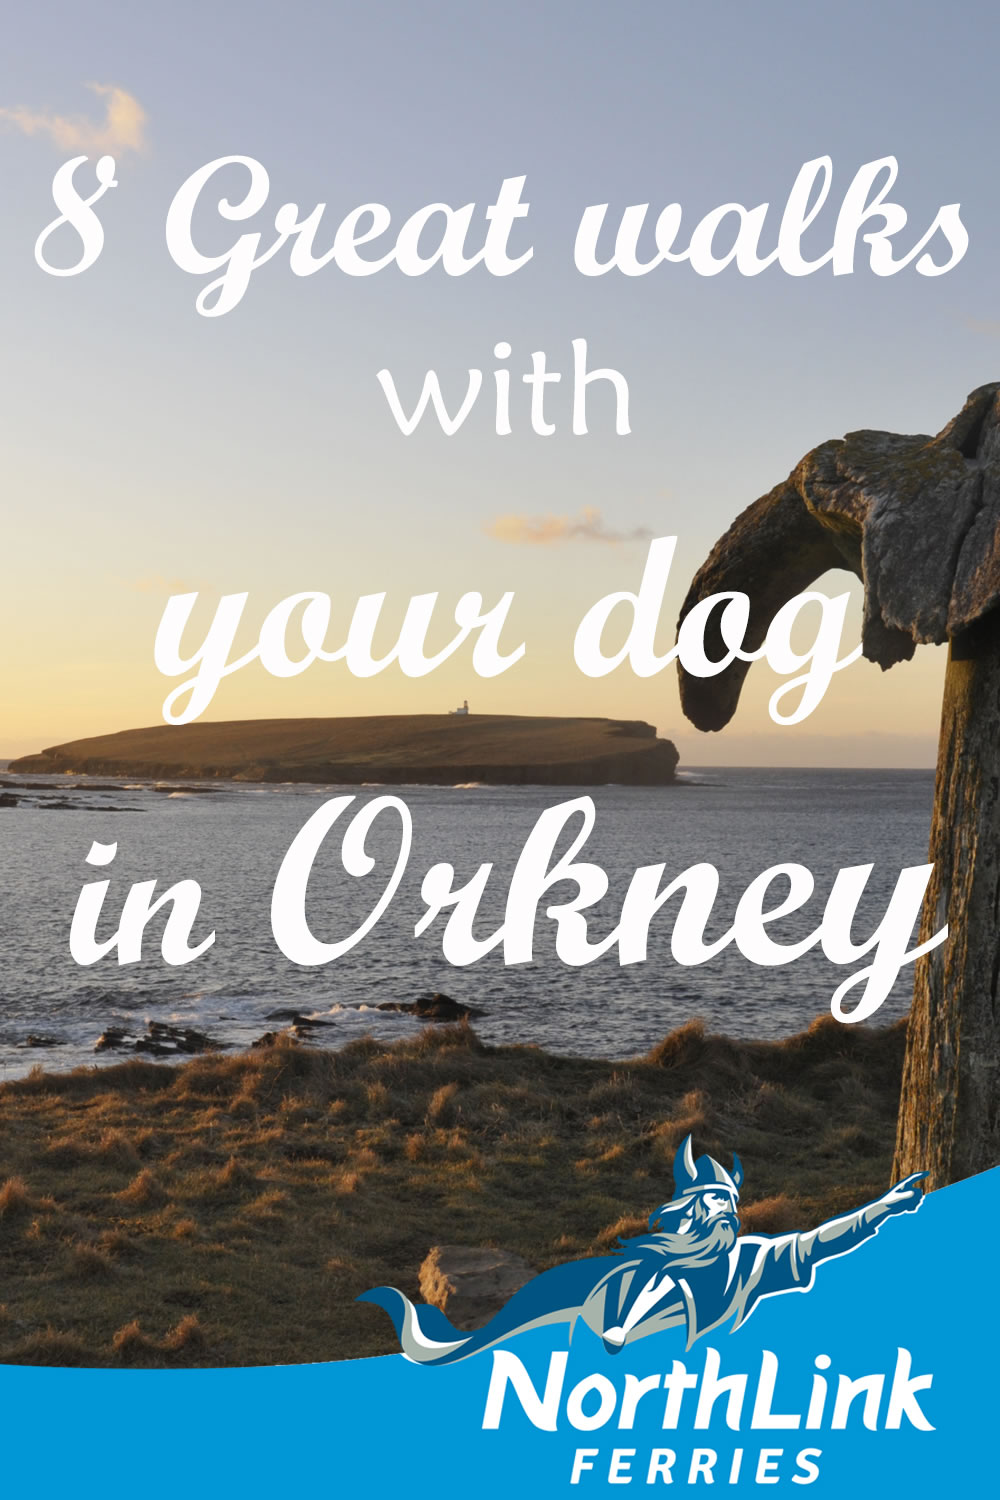 8 Great walks with your dog in Orkney